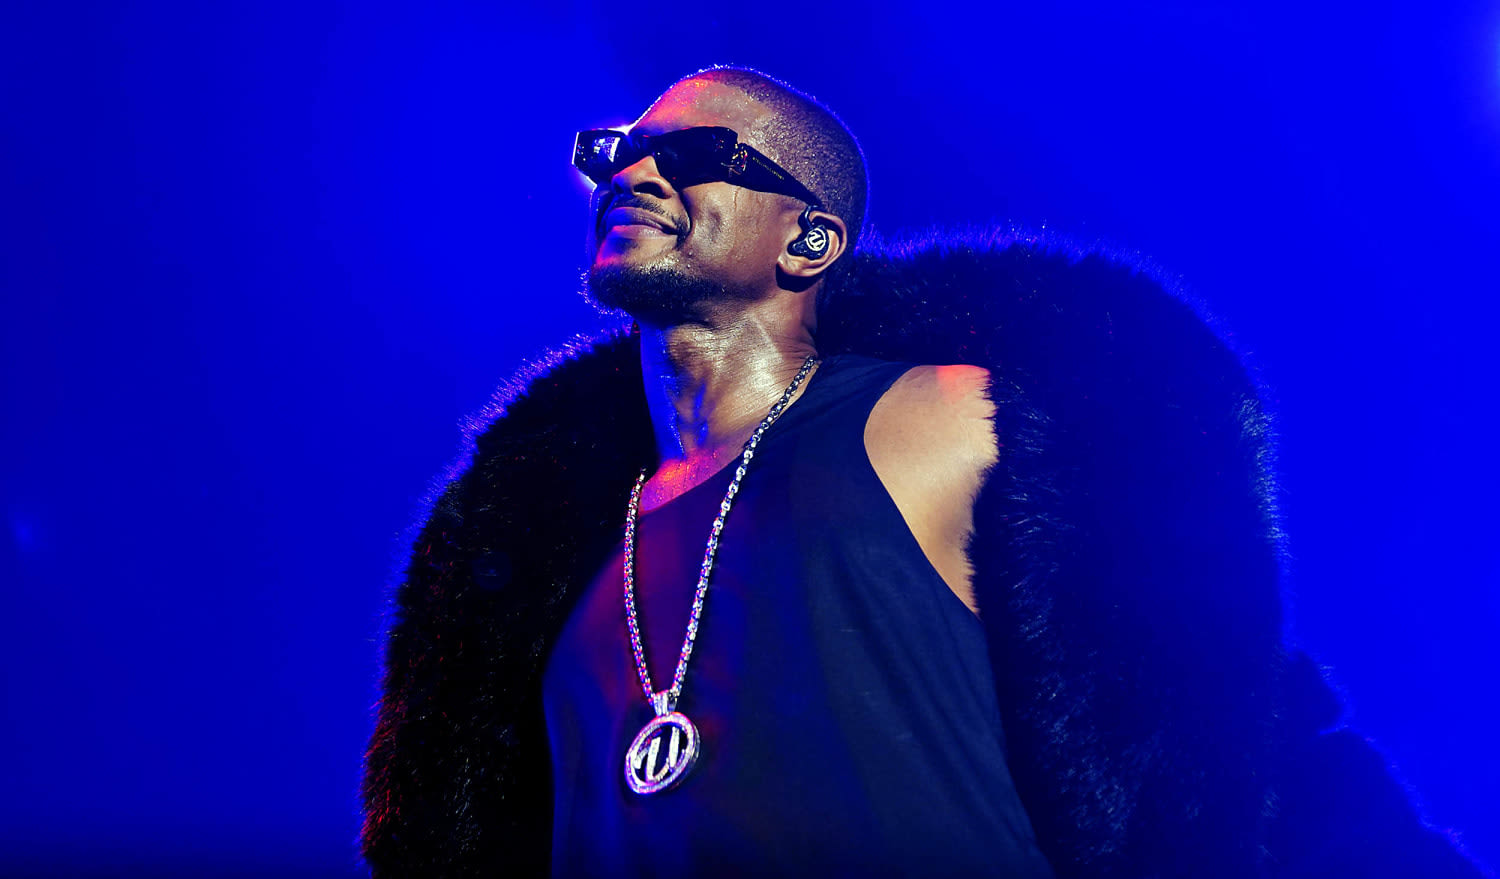 Usher’s Paris residency is being turned into a concert film. How to attend